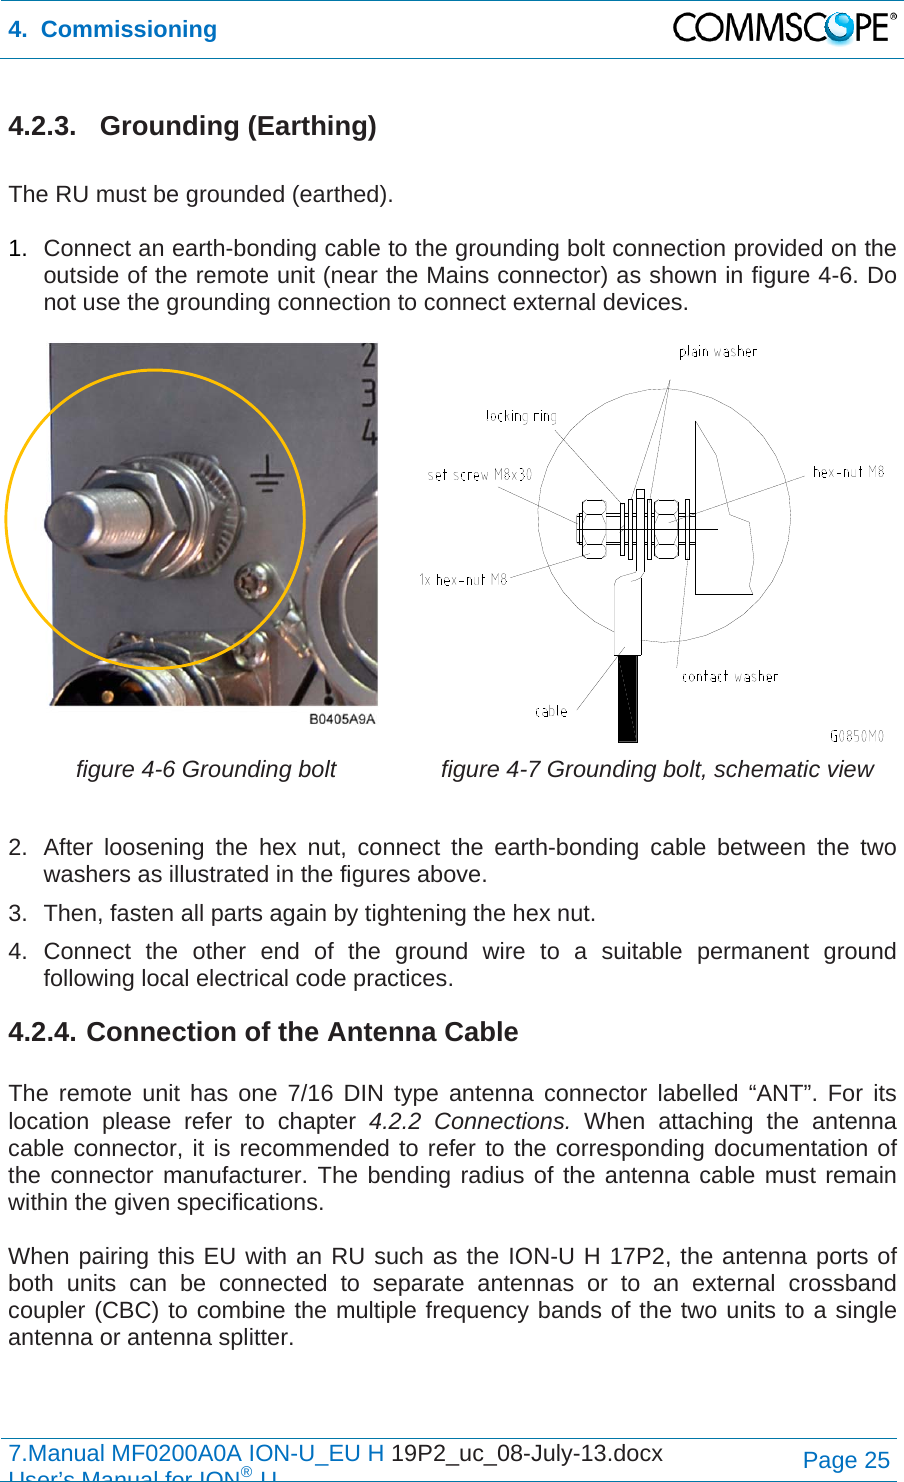 4.  Commissioning  7.Manual MF0200A0A ION-U_EU H 19P2_uc_08-July-13.docx   User’s Manual for ION®UPage 25 4.2.3. Grounding (Earthing)  The RU must be grounded (earthed).  1.  Connect an earth-bonding cable to the grounding bolt connection provided on the outside of the remote unit (near the Mains connector) as shown in figure 4-6. Do not use the grounding connection to connect external devices.   figure 4-6 Grounding bolt  figure 4-7 Grounding bolt, schematic view  2.  After loosening the hex nut, connect the earth-bonding cable between the two washers as illustrated in the figures above. 3.  Then, fasten all parts again by tightening the hex nut. 4. Connect the other end of the ground wire to a suitable permanent ground following local electrical code practices. 4.2.4. Connection of the Antenna Cable  The remote unit has one 7/16 DIN type antenna connector labelled “ANT”. For its location please refer to chapter 4.2.2 Connections. When attaching the antenna cable connector, it is recommended to refer to the corresponding documentation of the connector manufacturer. The bending radius of the antenna cable must remain within the given specifications.  When pairing this EU with an RU such as the ION-U H 17P2, the antenna ports of both units can be connected to separate antennas or to an external crossband coupler (CBC) to combine the multiple frequency bands of the two units to a single antenna or antenna splitter.    